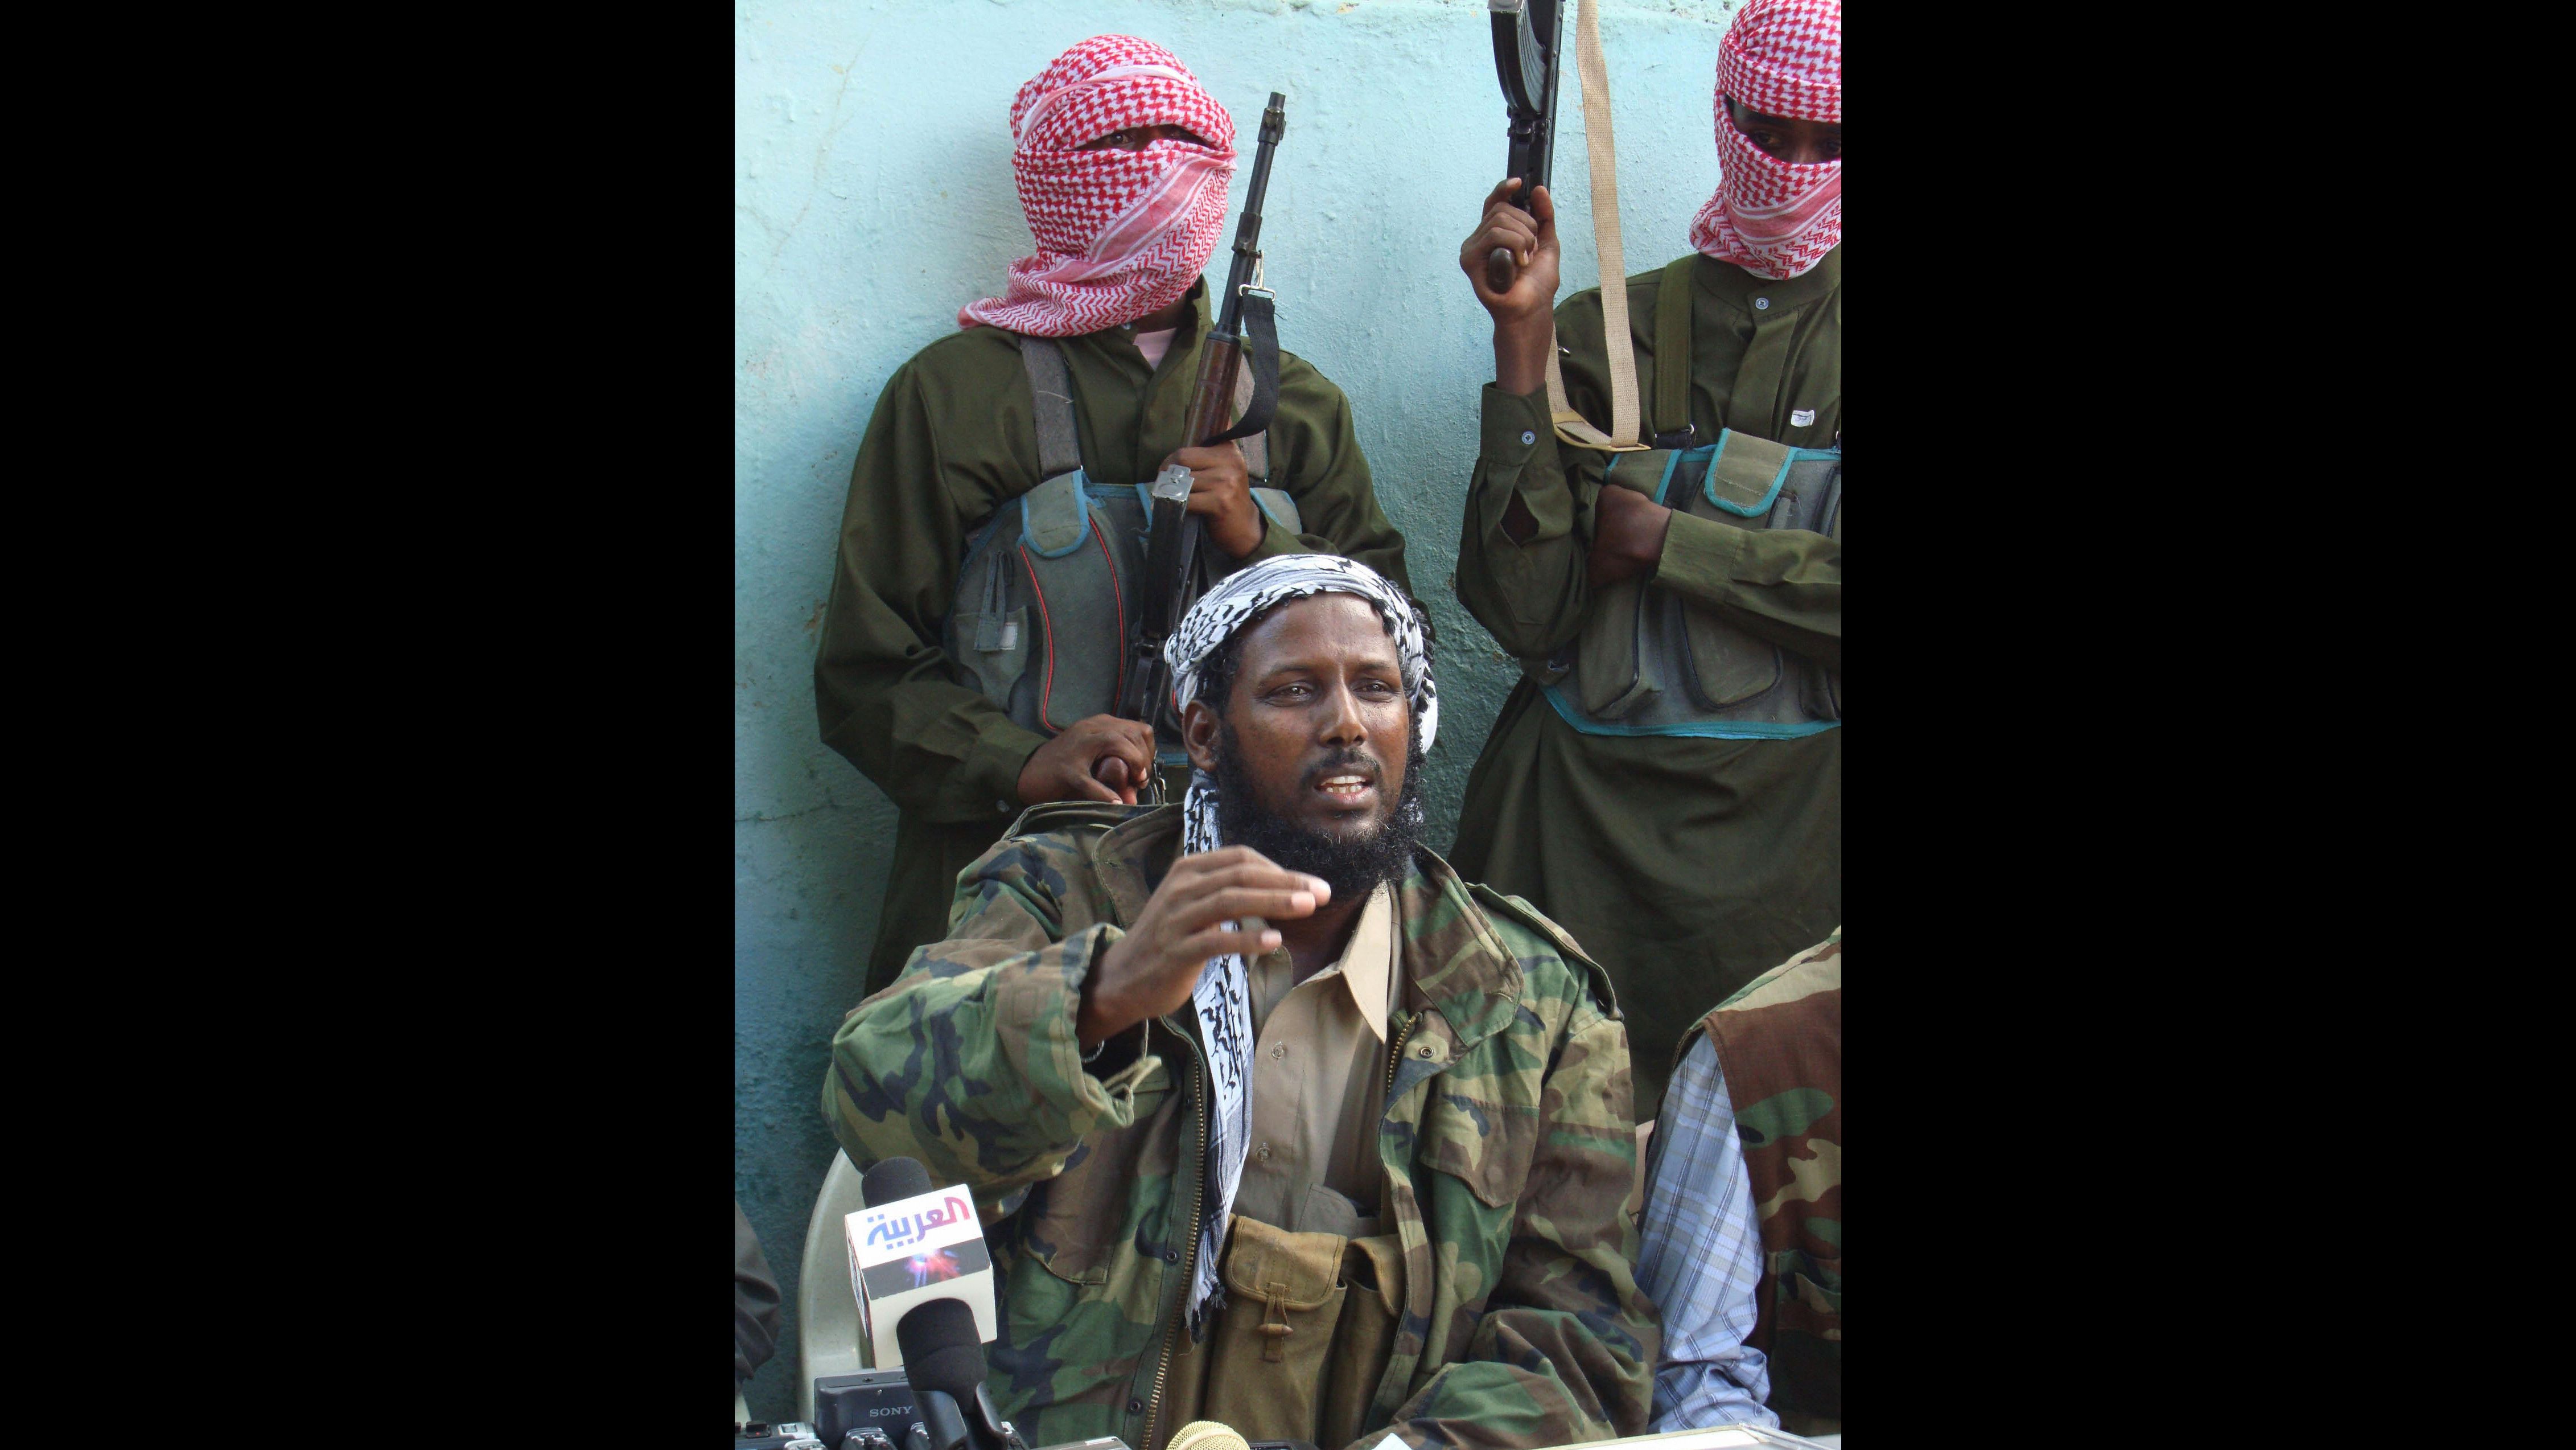 Mukhtar Robow speaks during a 2008 news conference in Mogadishu.  